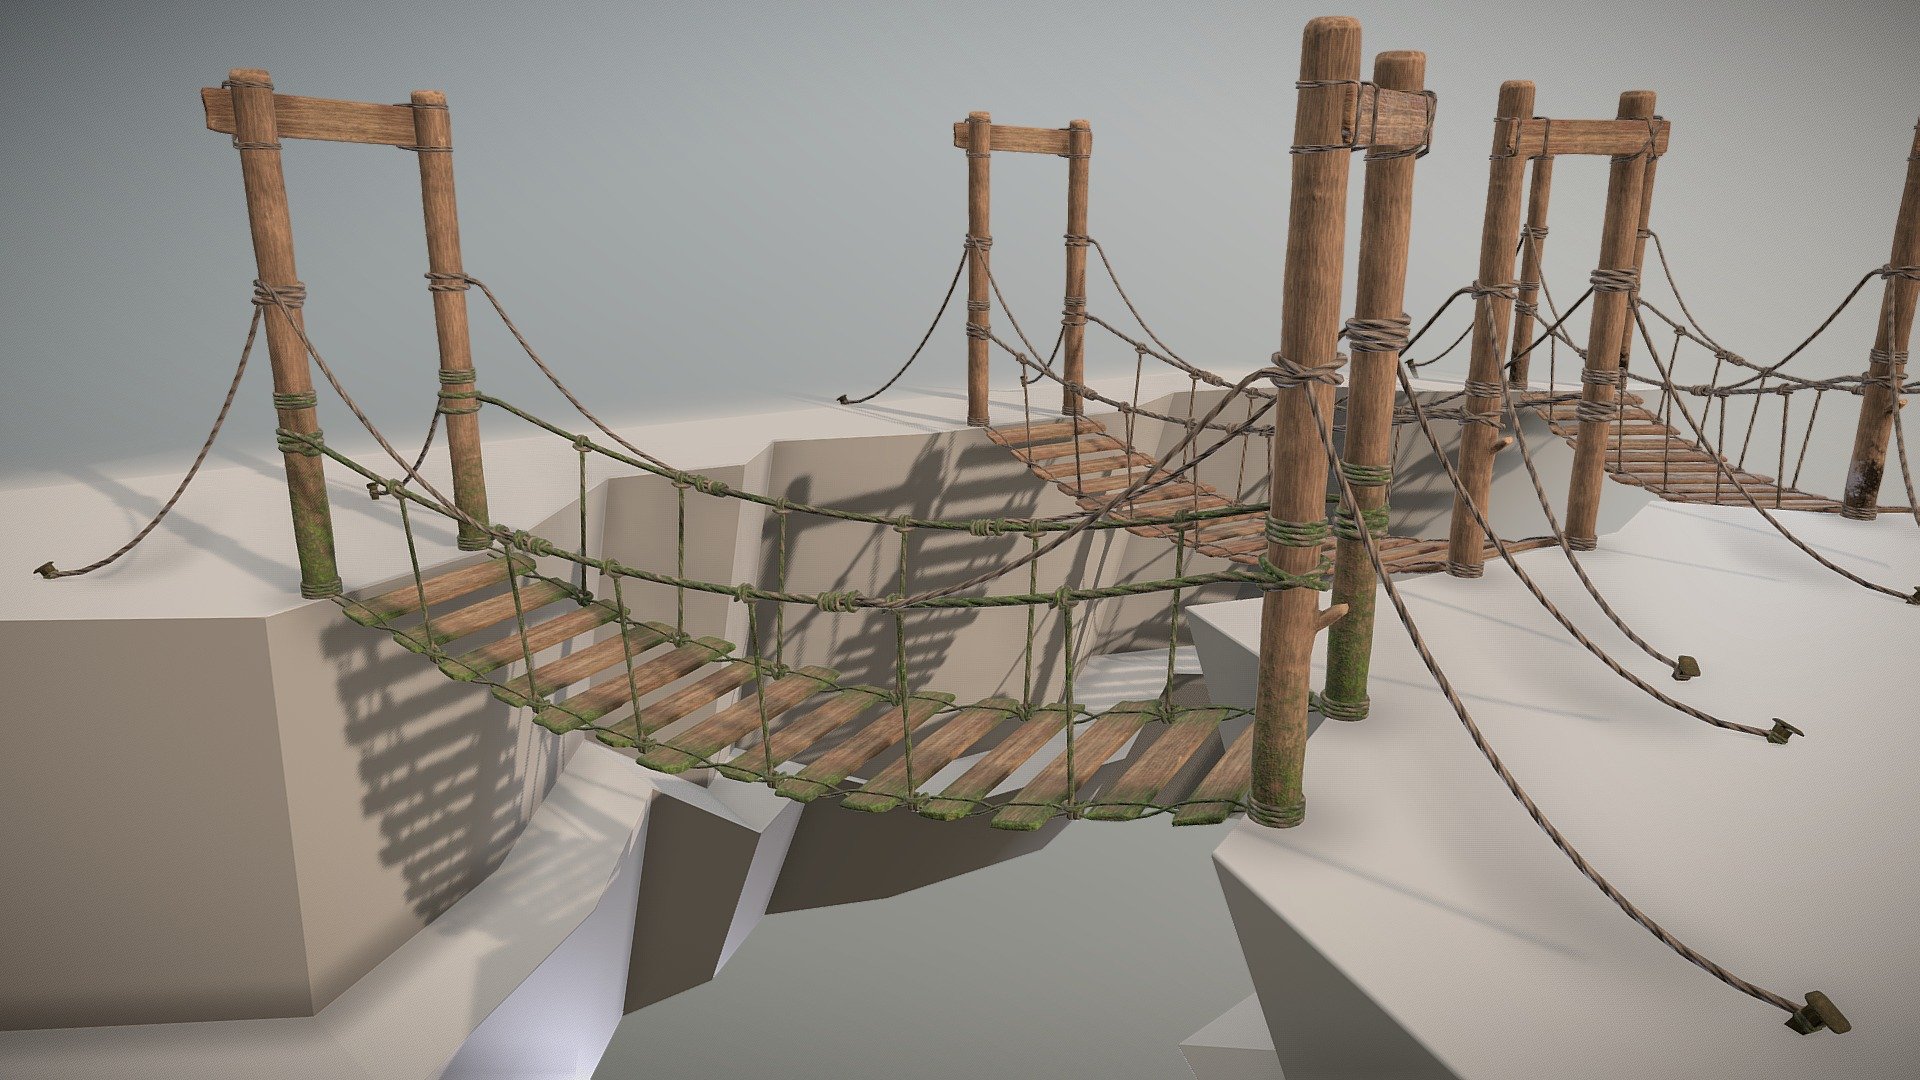 One more variant rope bridge designed to be game-ready while still having as much detail as possible. This asset is 1 meter wide x 2.5 meter tall x 5 meter long with extra tie downs extending a bit further. It contains a 2K, PBR ready material (10.24 texel density) with a base color, roughness, height, and normal map. The model uses overlapping UVs. It was created using fully licensced software (Maya, Zbrush, and Substance Painter) and can be used in any of your projects. Model is 42K Tris each.


Additional files contains:


4K and 1K Textures 
3 additional LODs (LOD1 - LOD3) 
Kit used to build the asset. 


Thanks for taking a look at my work! Feel free to give me a like or leave a comment if you have any questions. Be sure to follow as I will be making more assets in the future with a freebie every now and then 3d model